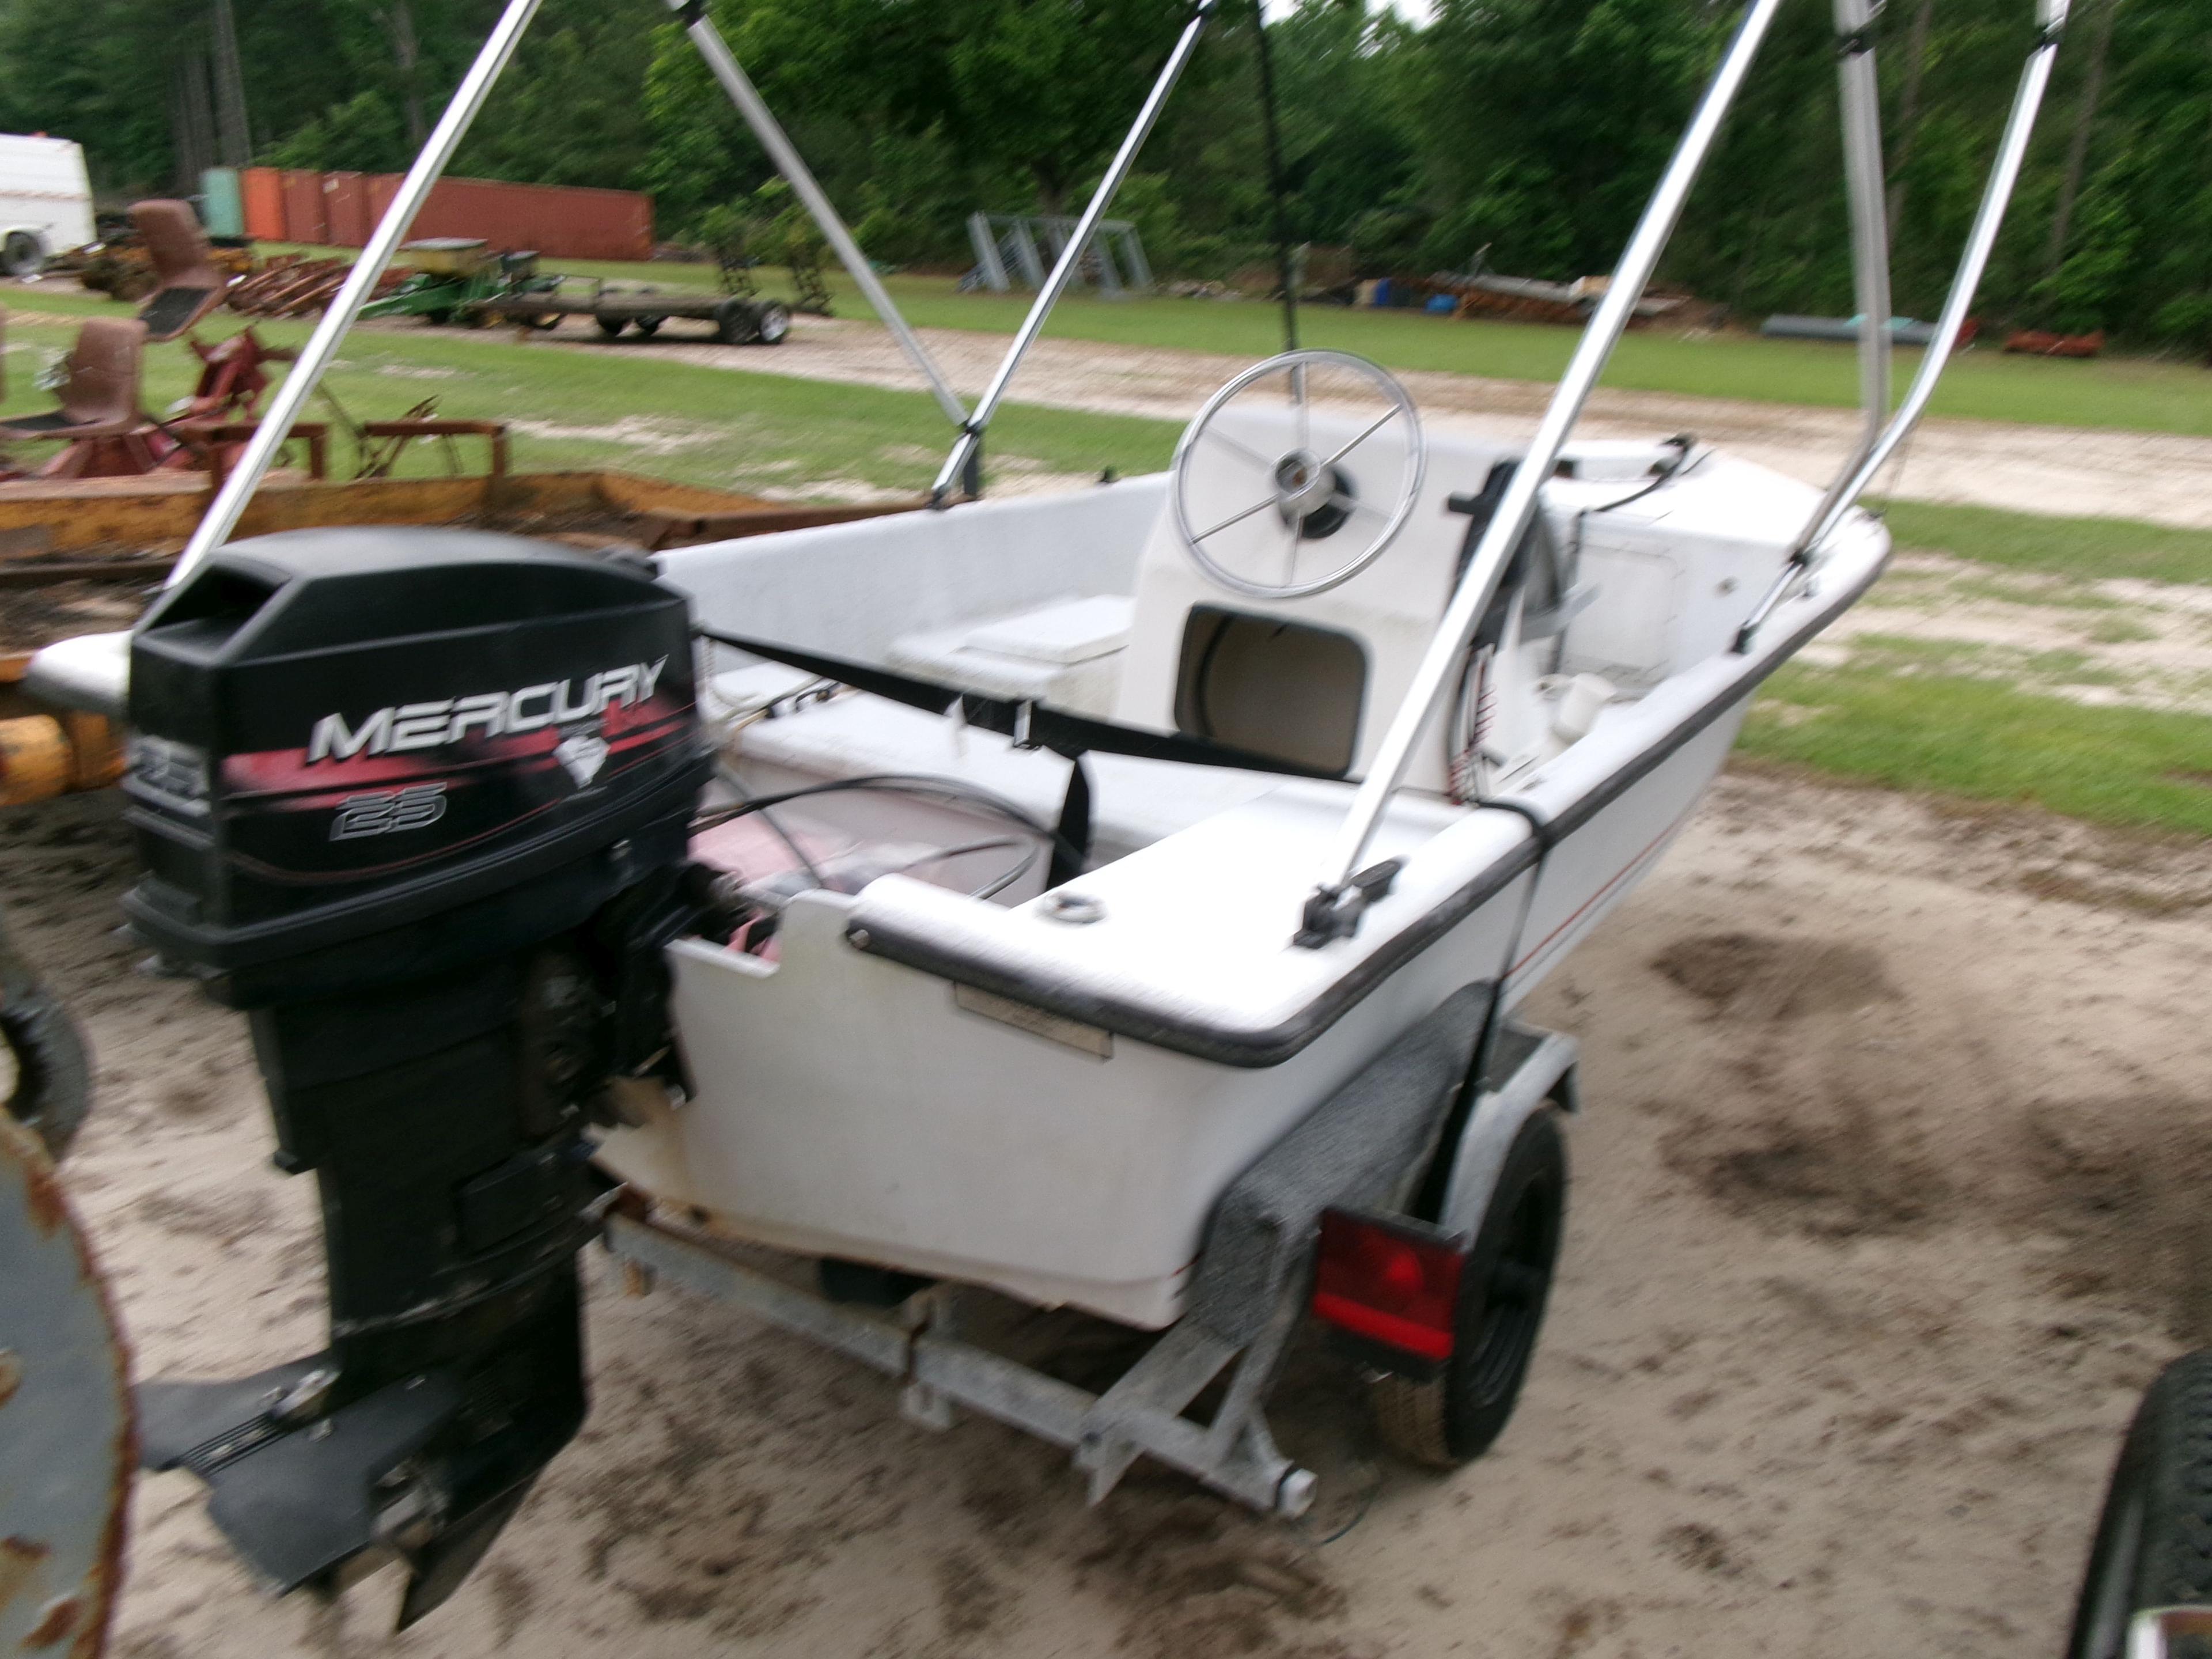 (0548)  1998 BAY RAYDER 14.5' BOAT W/TITLE